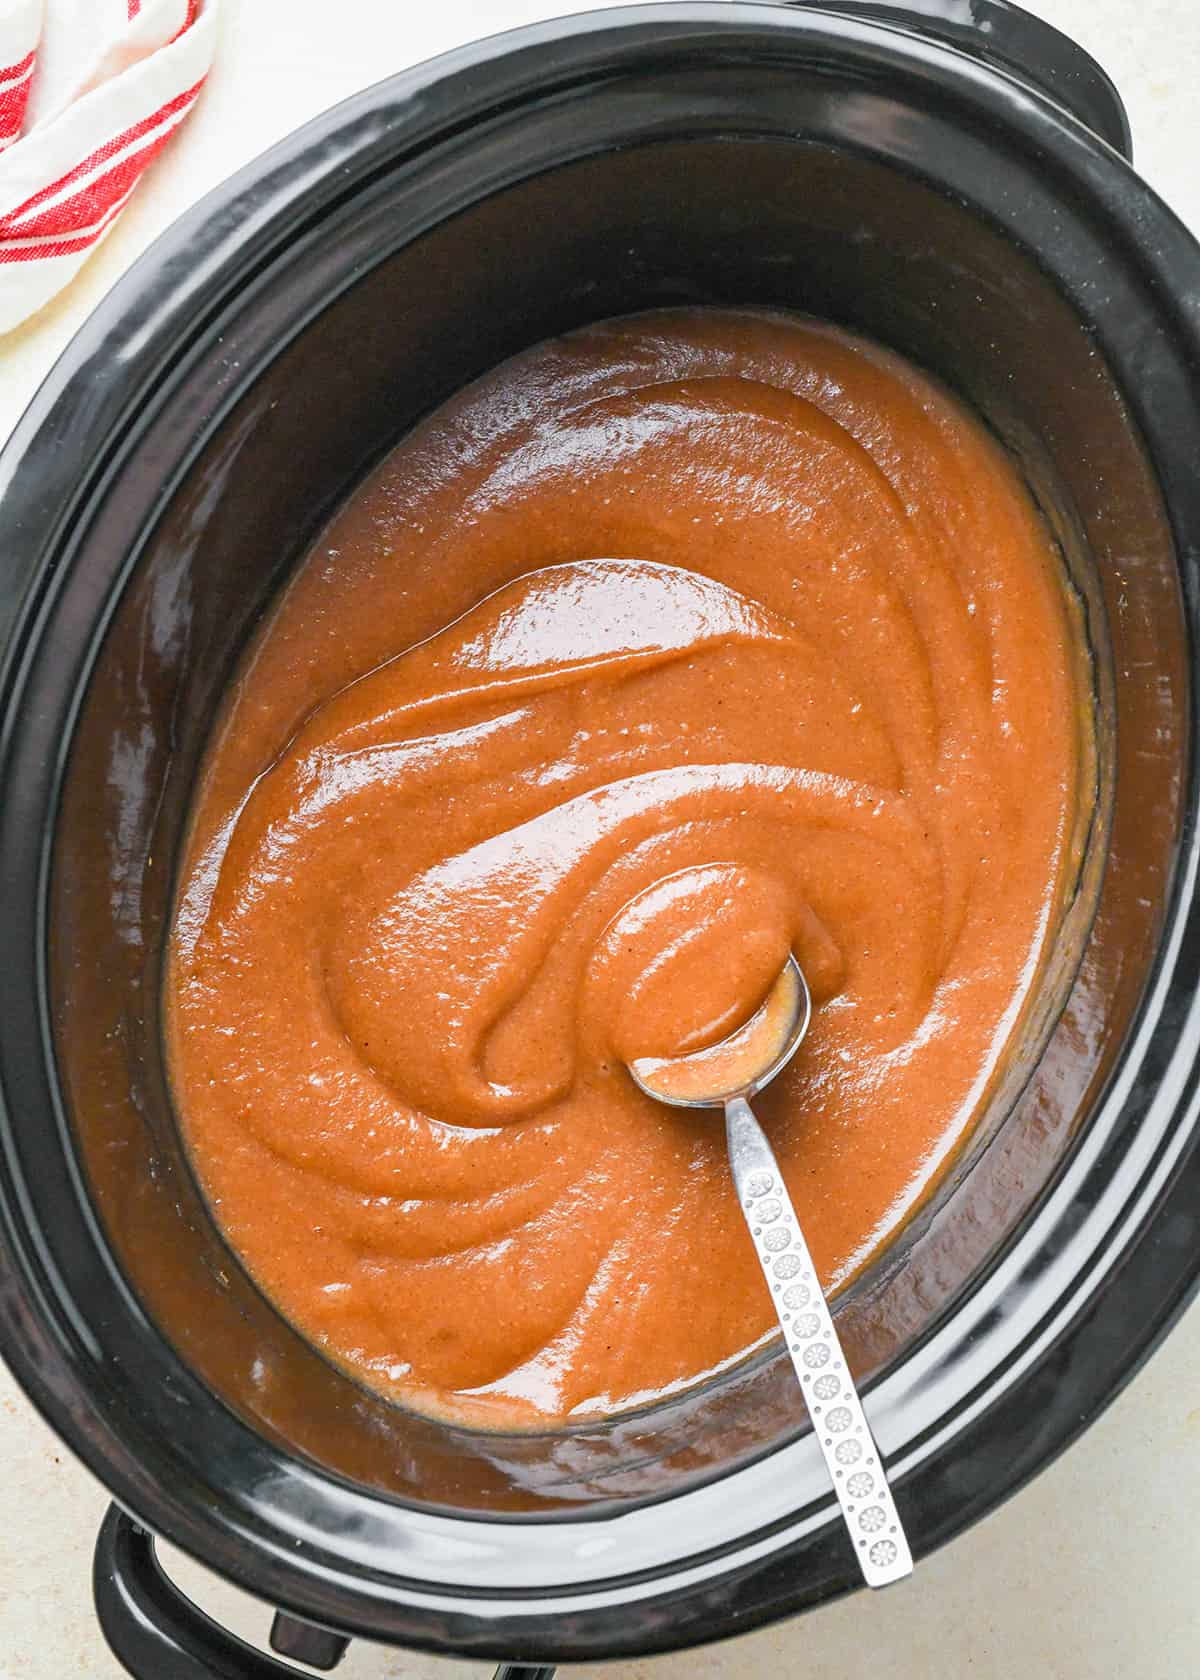 apple butter cooking in a crockpot, uncovered to thicken